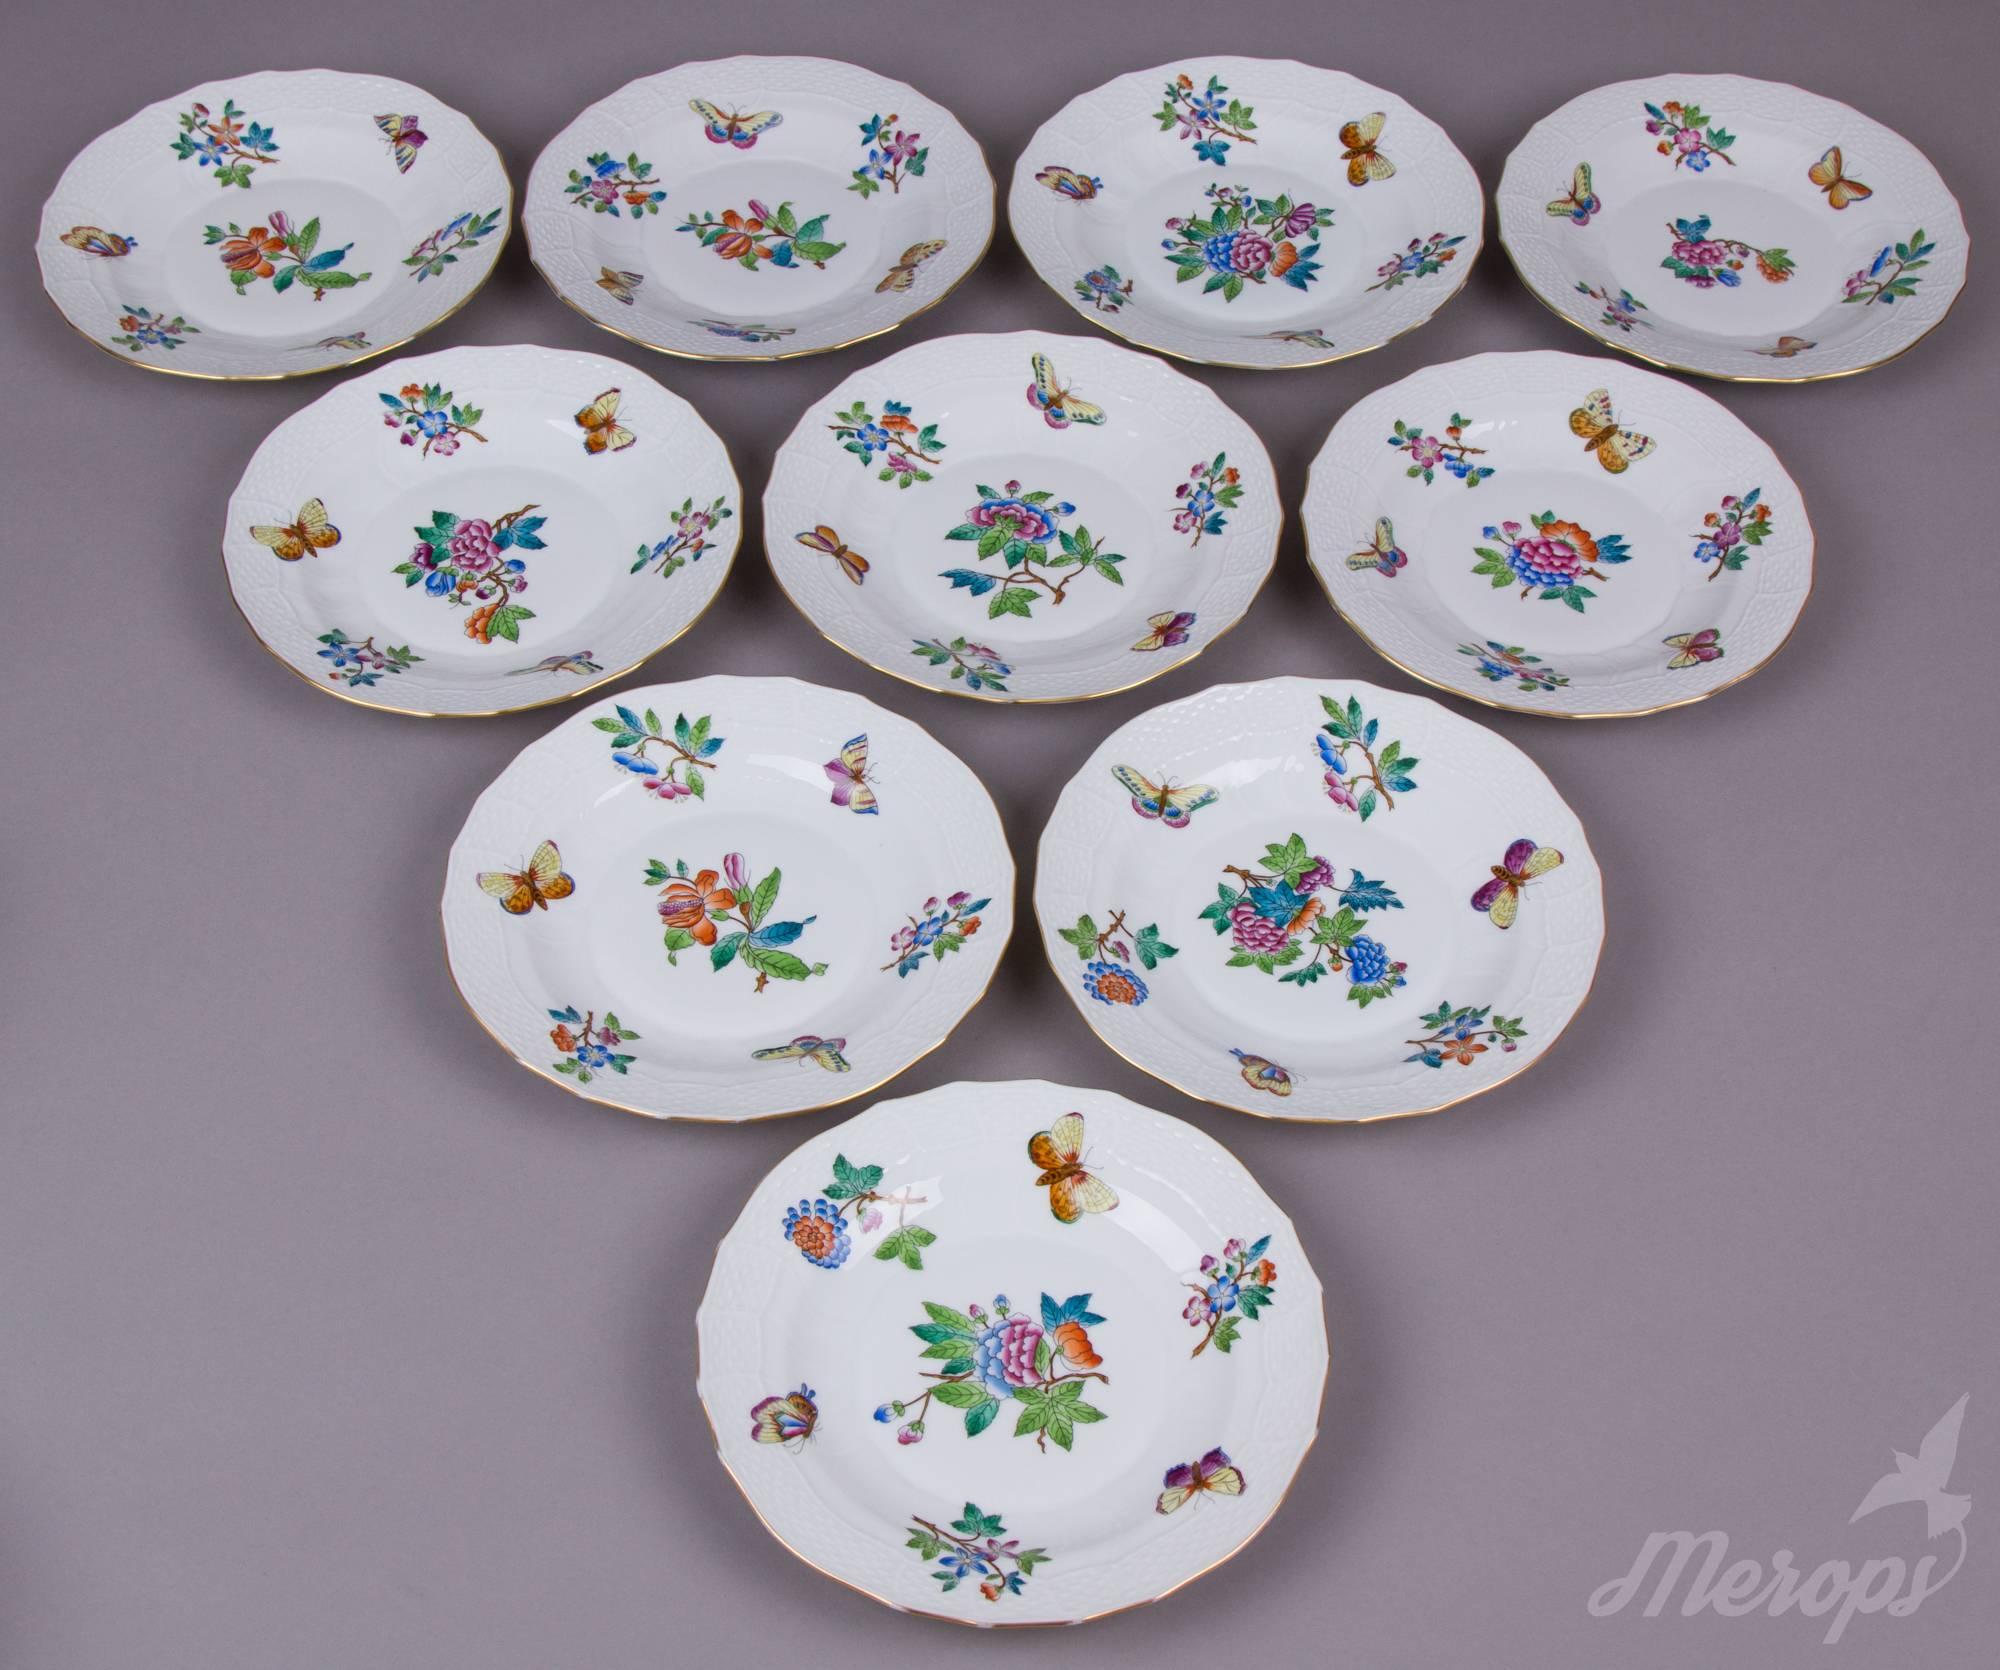 We ship this item worldwide for 70 USD with insurance. Shipping usually takes 3-7 business days. 

Manufacturer: Herend Porcelain Manufactory (Hungary).
Quality: Handpainted, 1st class.
Pattern: Queen Victoria (VA).
Condition: Used, in